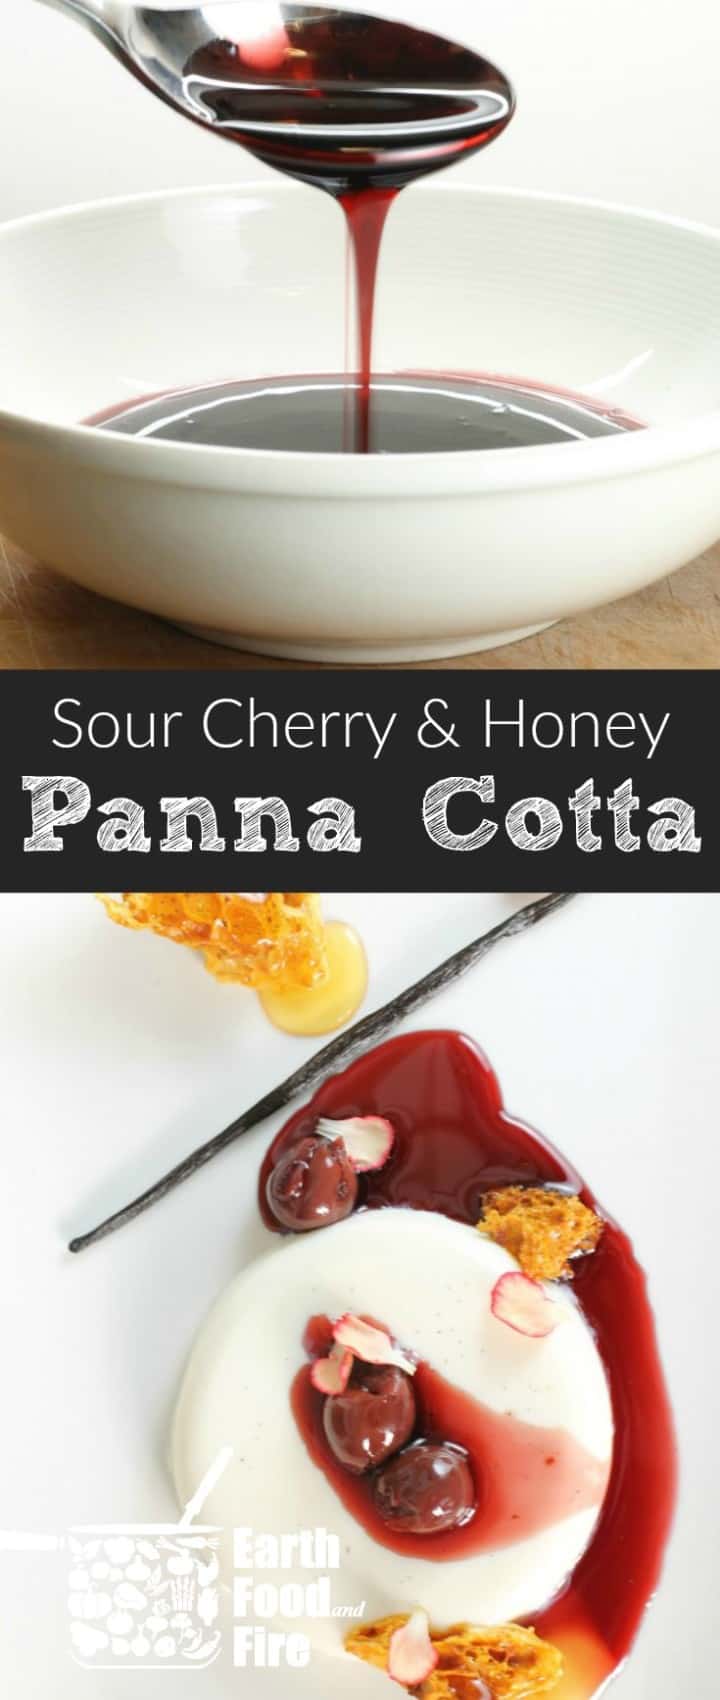 A surprisingly simple yet stunning dessert, this Honey Panna Cotta, garnished with cherries & sponge toffee is sure to impress any guest or date! #pannacotta #holiday #dessert #easydessert #cherry #sourcherry #honey